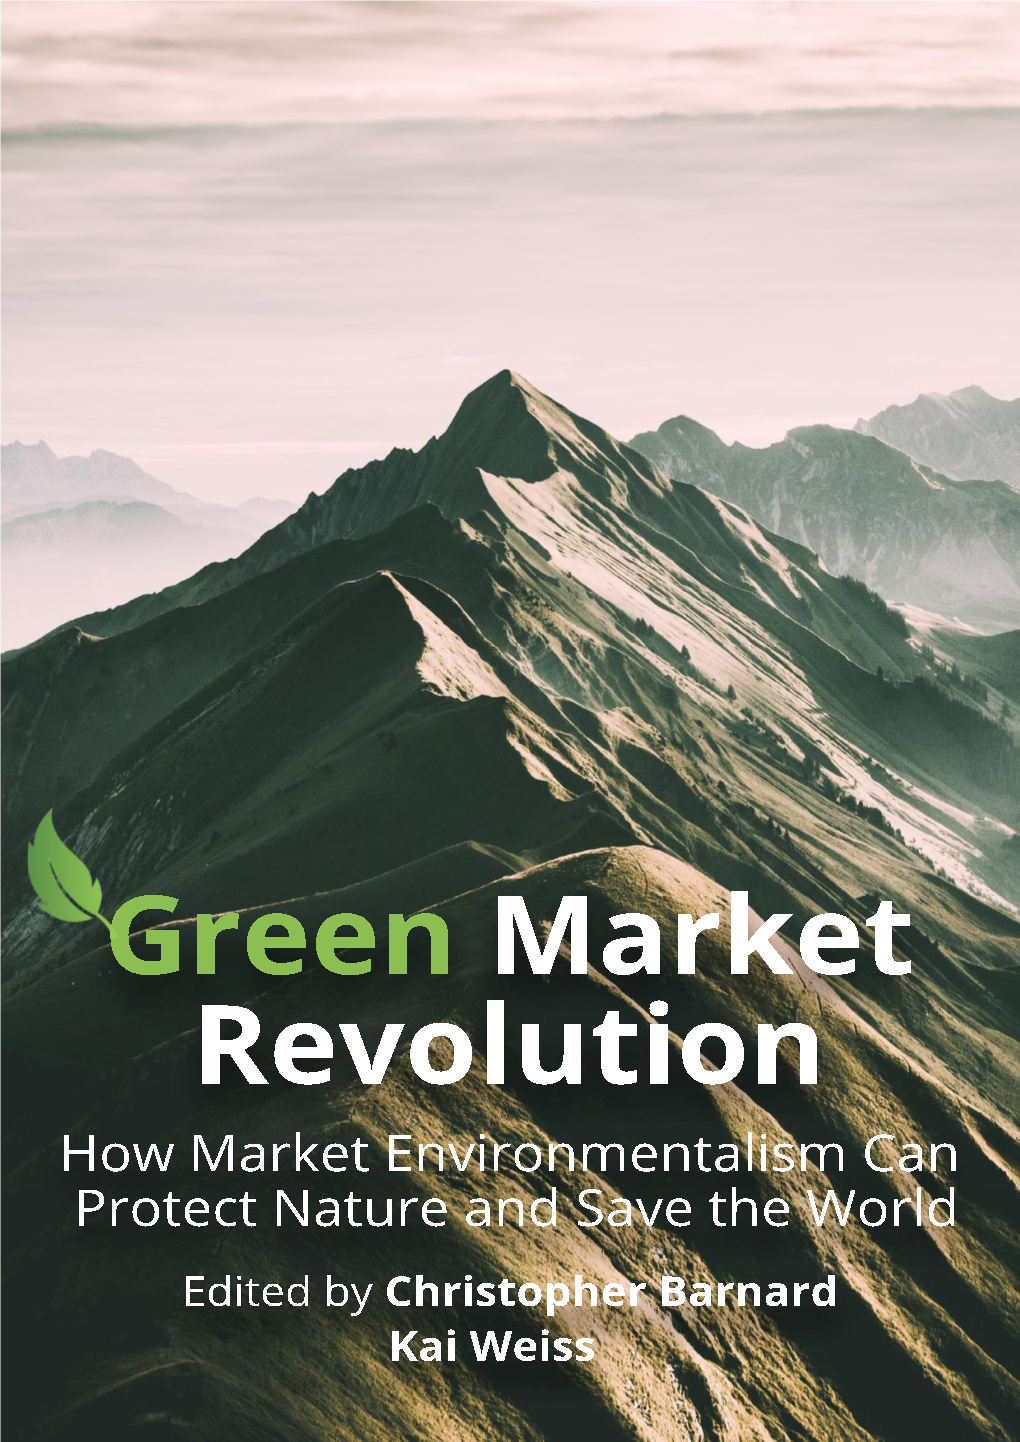 Green Market Revolution Market Green Green Market Revolution How Market Environmentalism Can Protect Nature and Save the World Edited by Christopher Barnard Kai Weiss